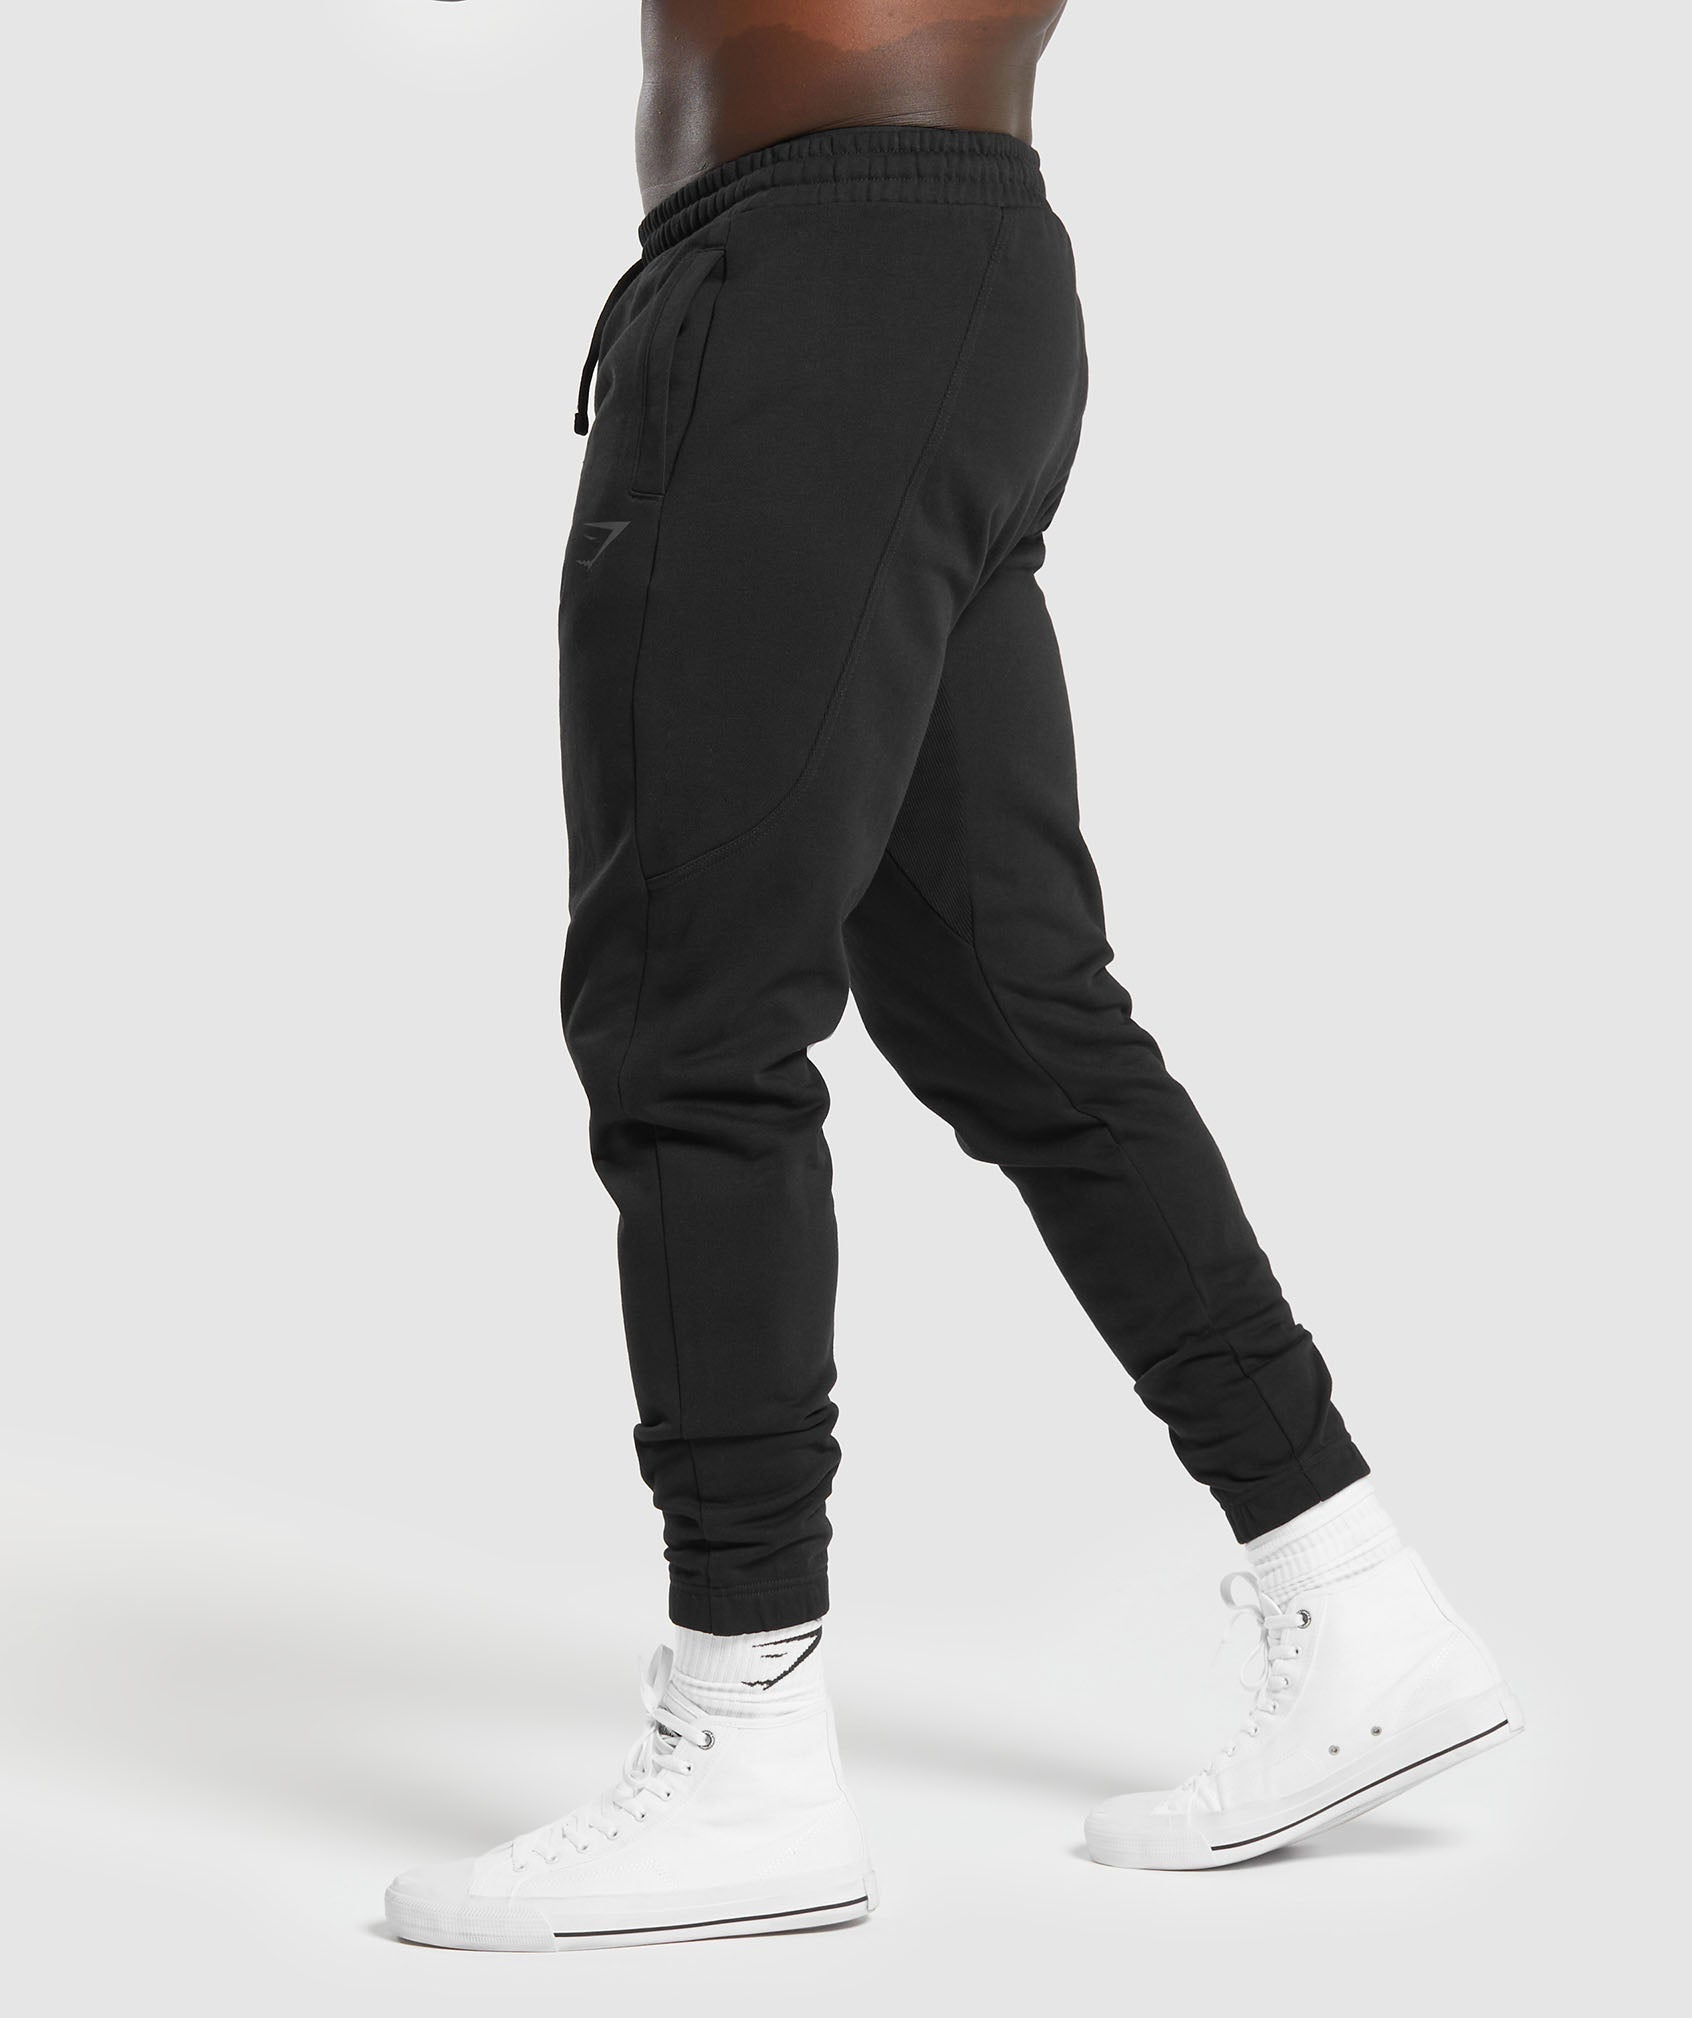 Power Joggers in Black - view 4